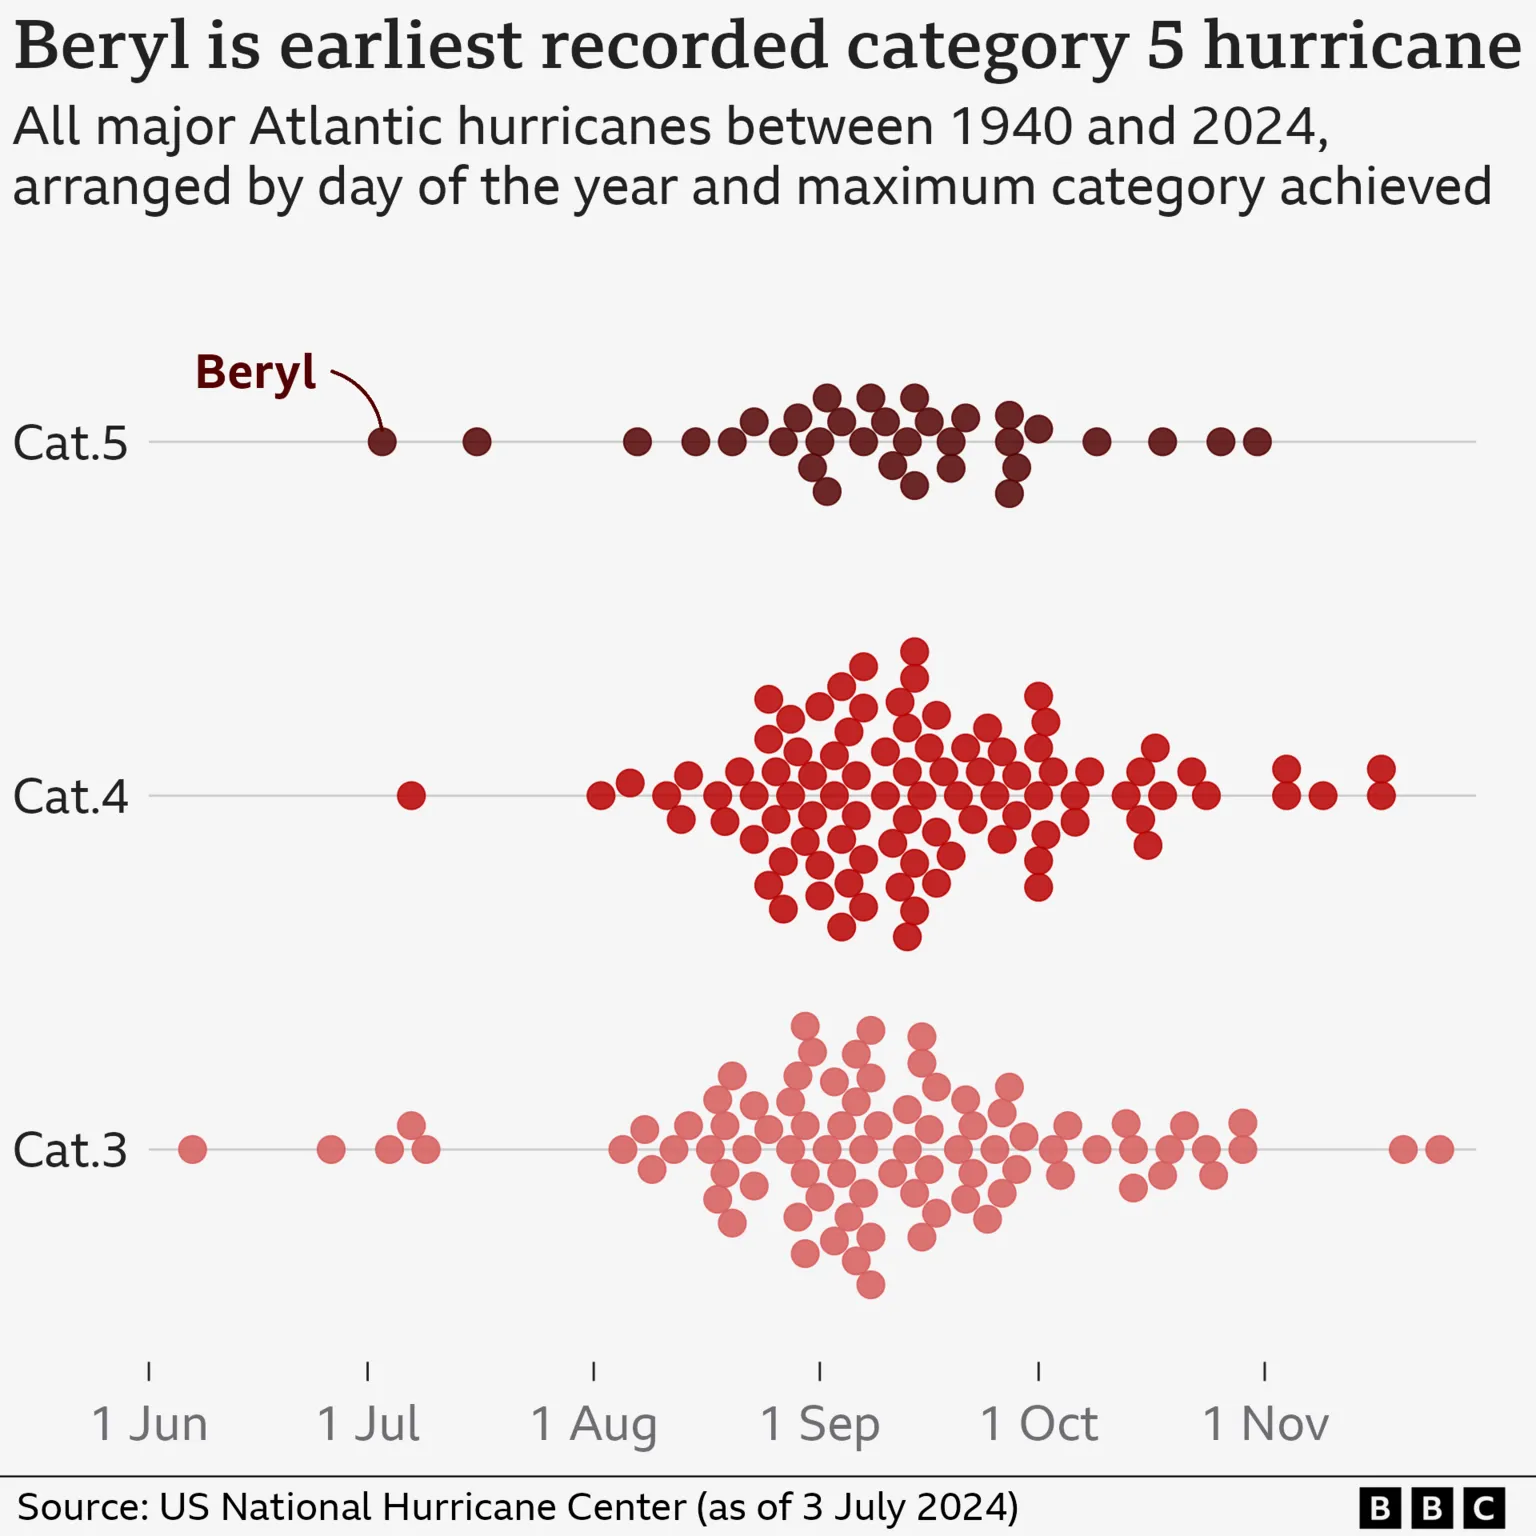 Graph showing all major Atlantic hurricanes between 1940 and 2024, arranged by day of the year and maximum category achieved. Beryl is the earliest recorded Category 5 hurricane on record. Data are current to 3 July 2024. Data: U.S. National Hurricane Center. Graphic: BBC